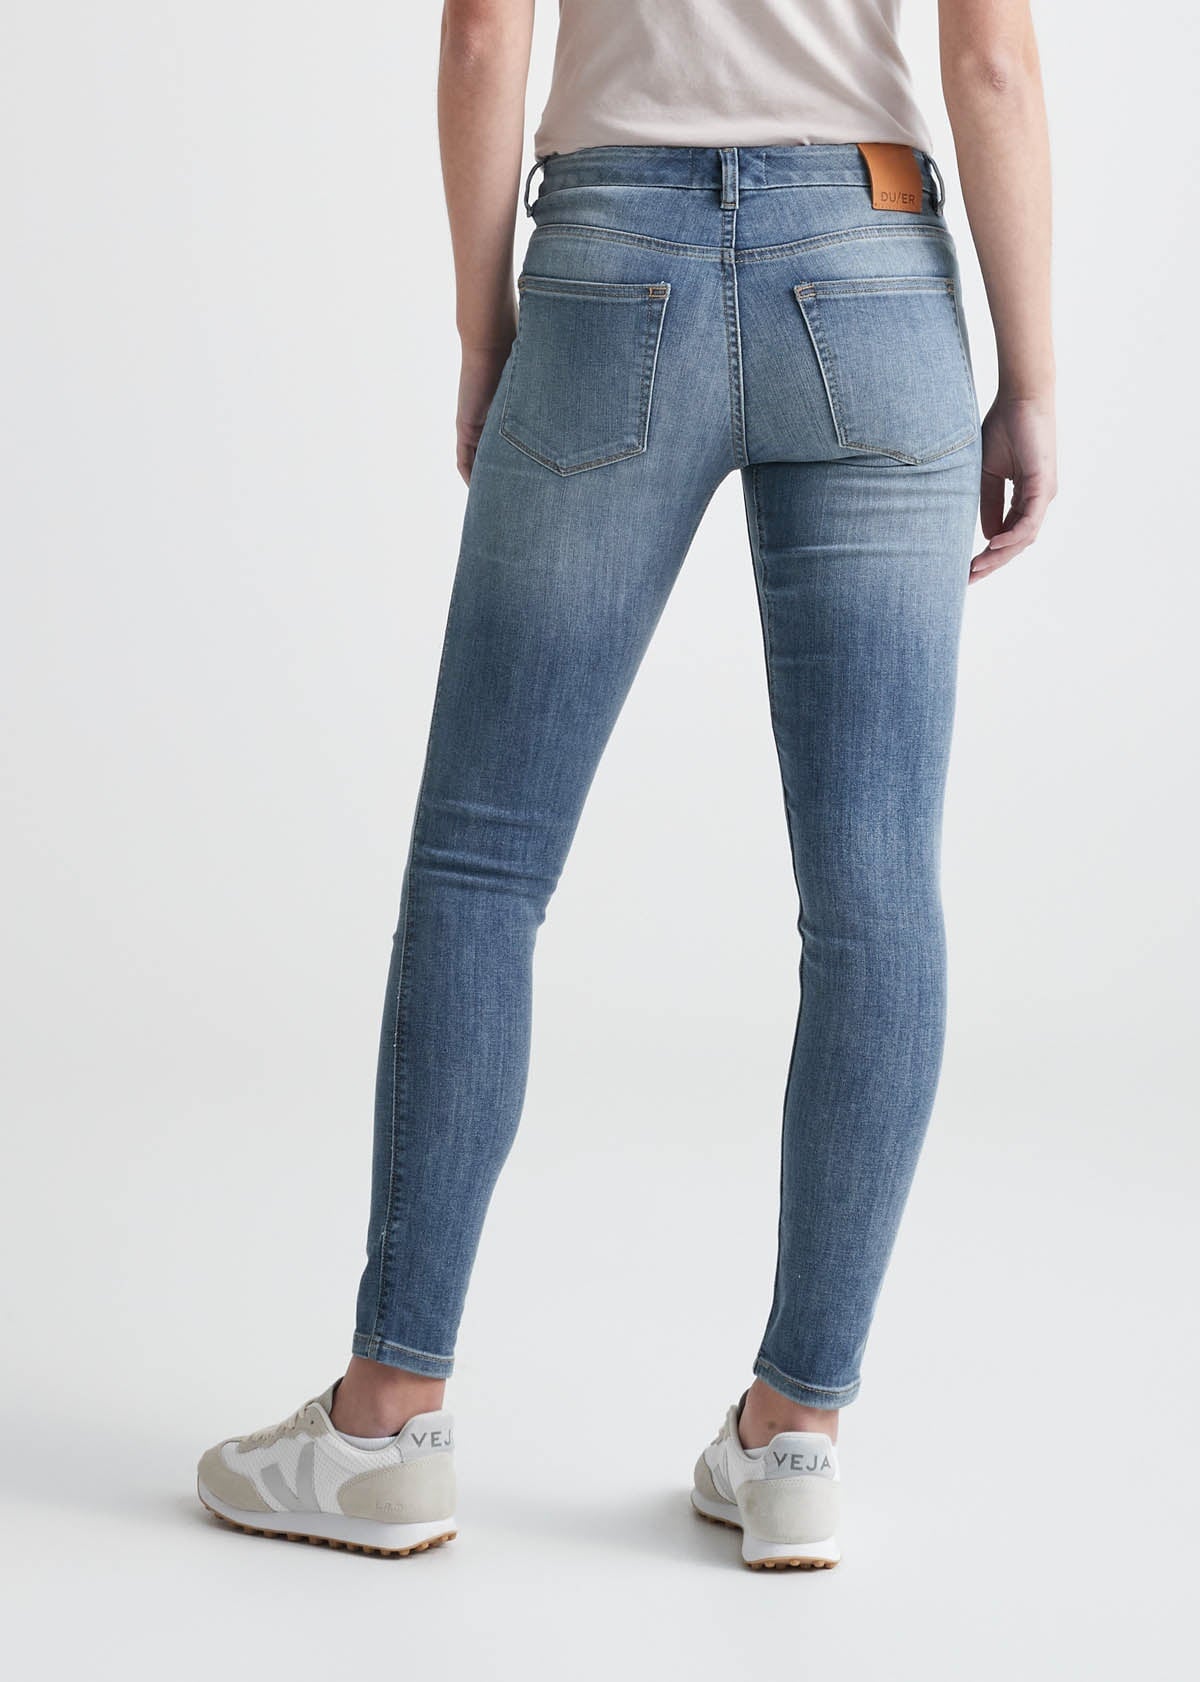 Women's Mid Rise Relaxed Fit Stretch Jeans